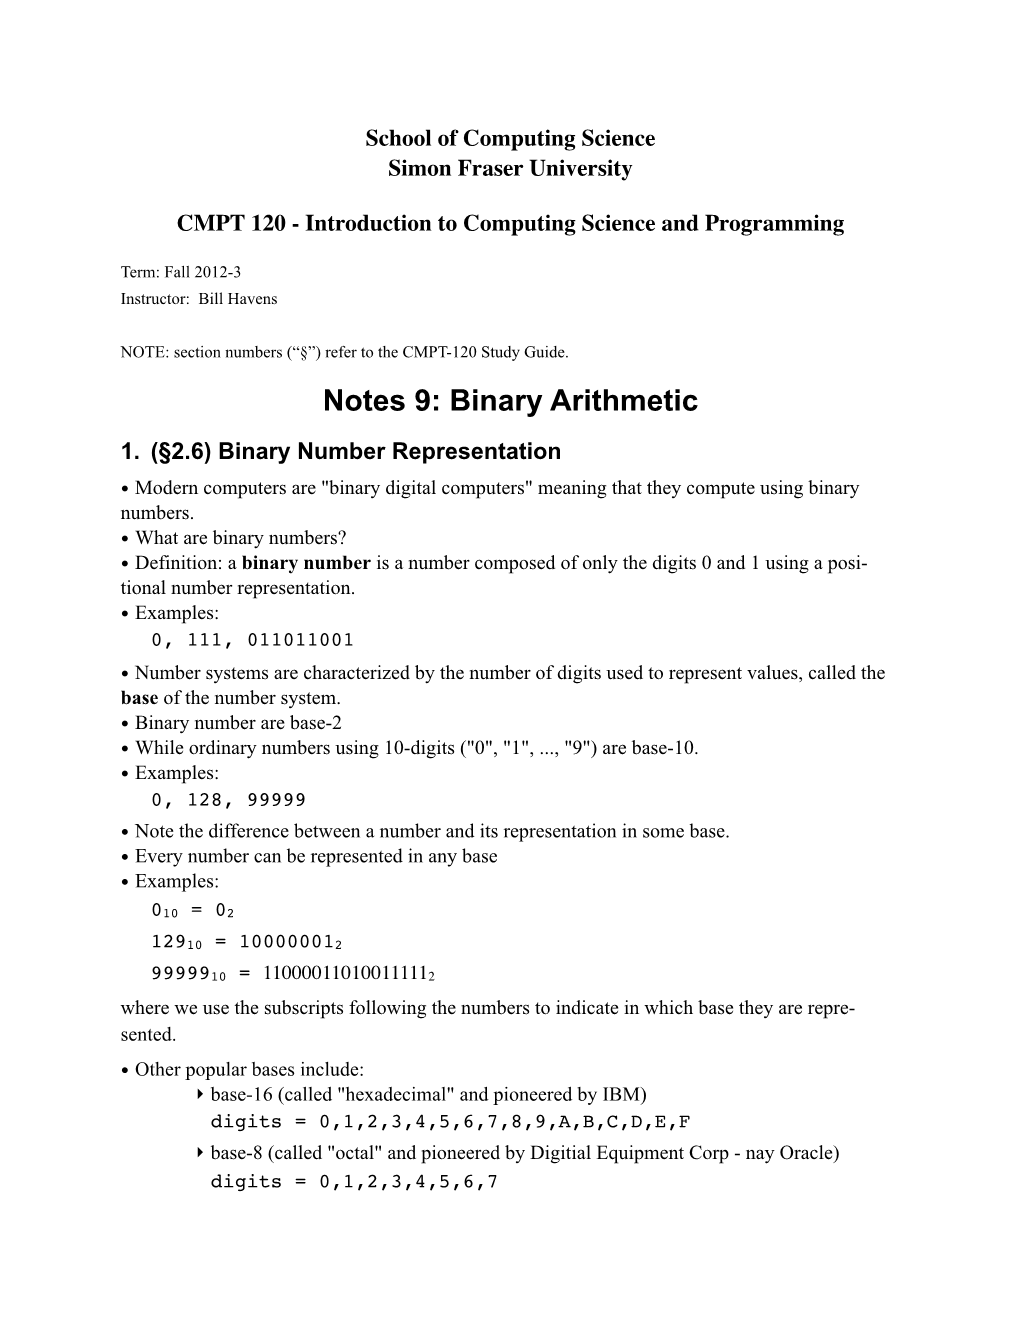 Notes 9: Binary Arithmetic